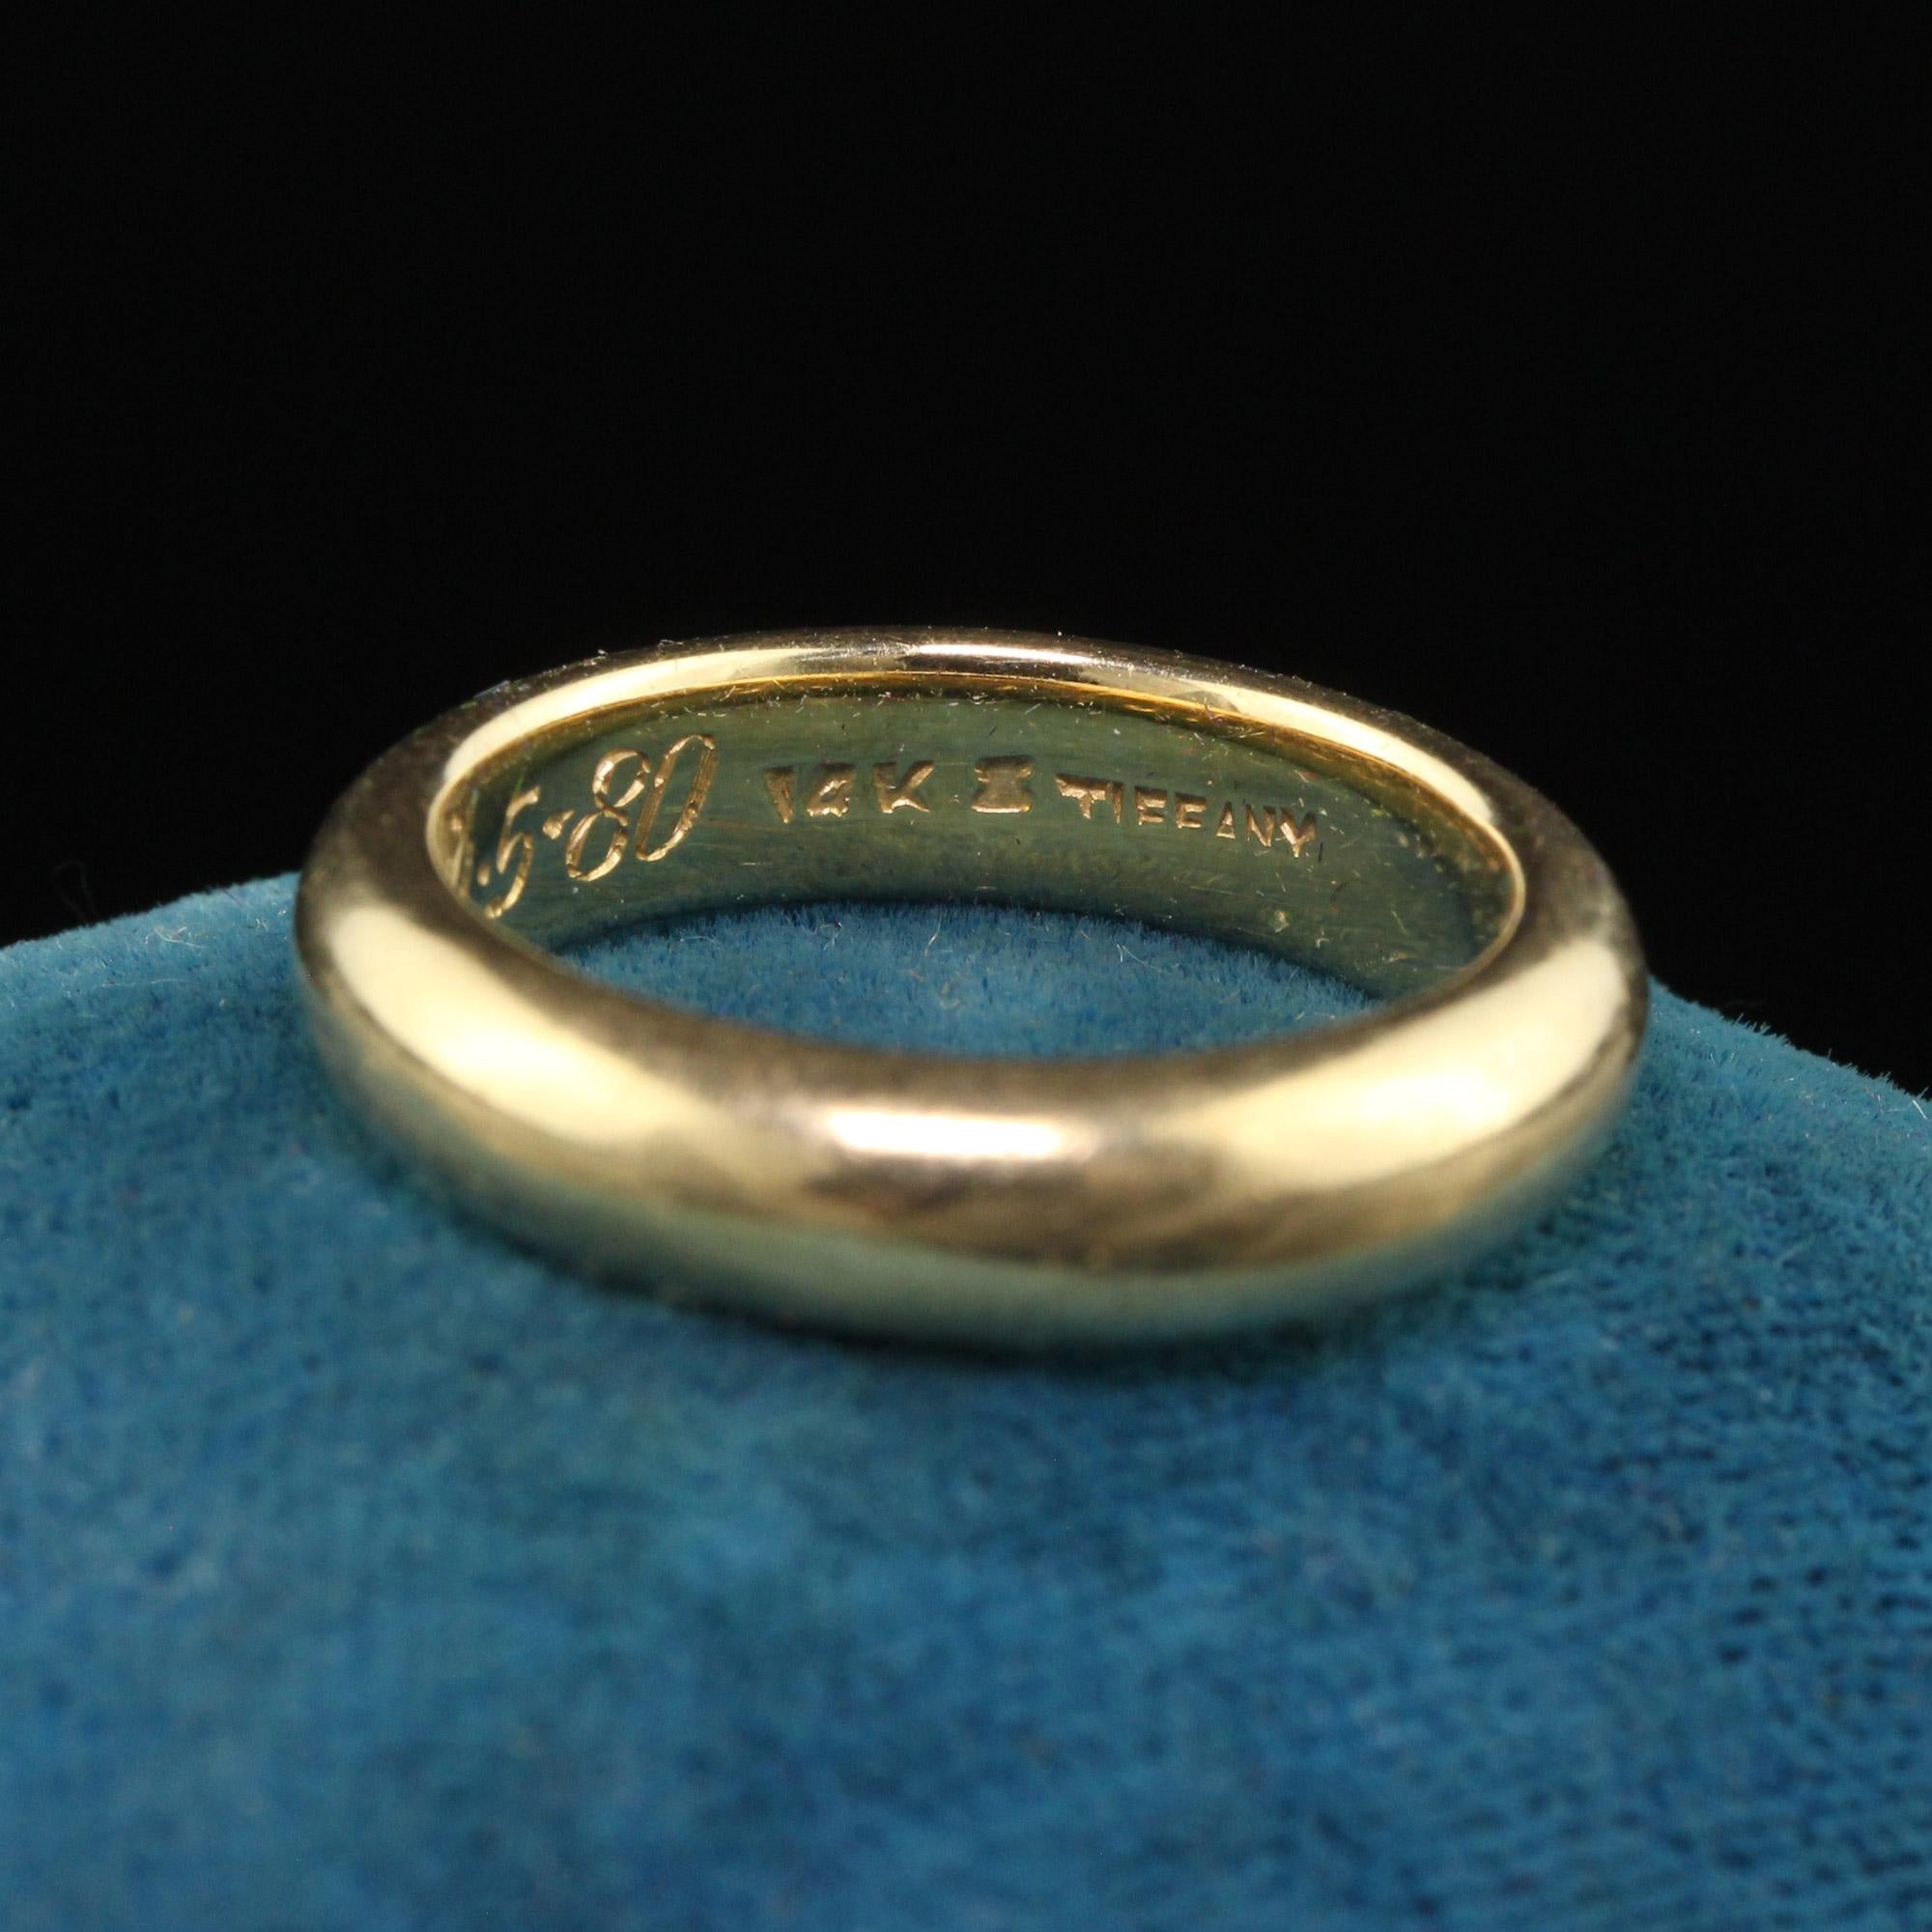 Vintage Tiffany and Co 14K Yellow Gold Classic Wedding Band - Size 4 1/2 In Good Condition For Sale In Great Neck, NY